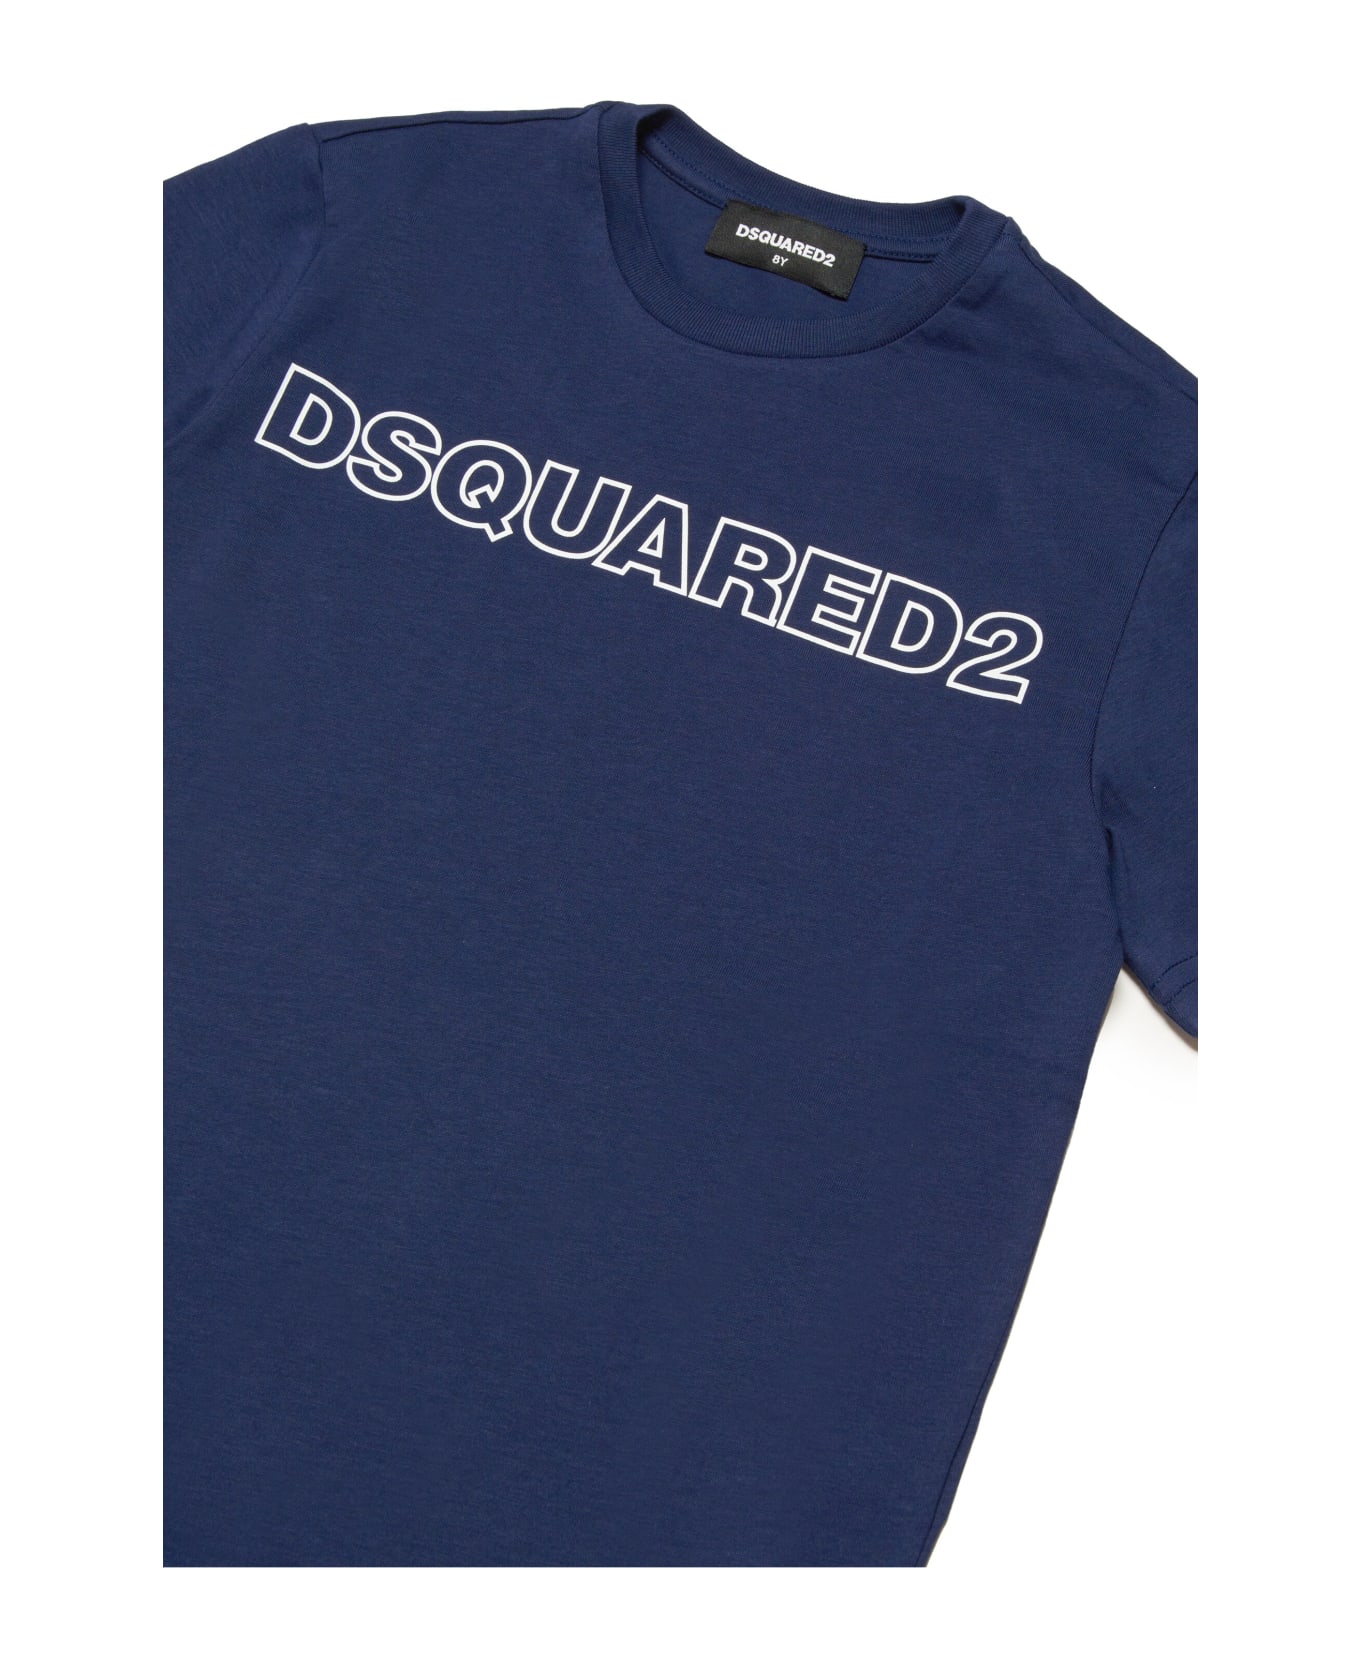 Dsquared2 D2t948u Relax T-shirt Dsquared Crew-neck, Short-sleeved, Cotton Jersey T-shirt. Fit: Relaxed Fit, Regular. The Garment Features 's Contrastin - Blu Tシャツ＆ポロシャツ